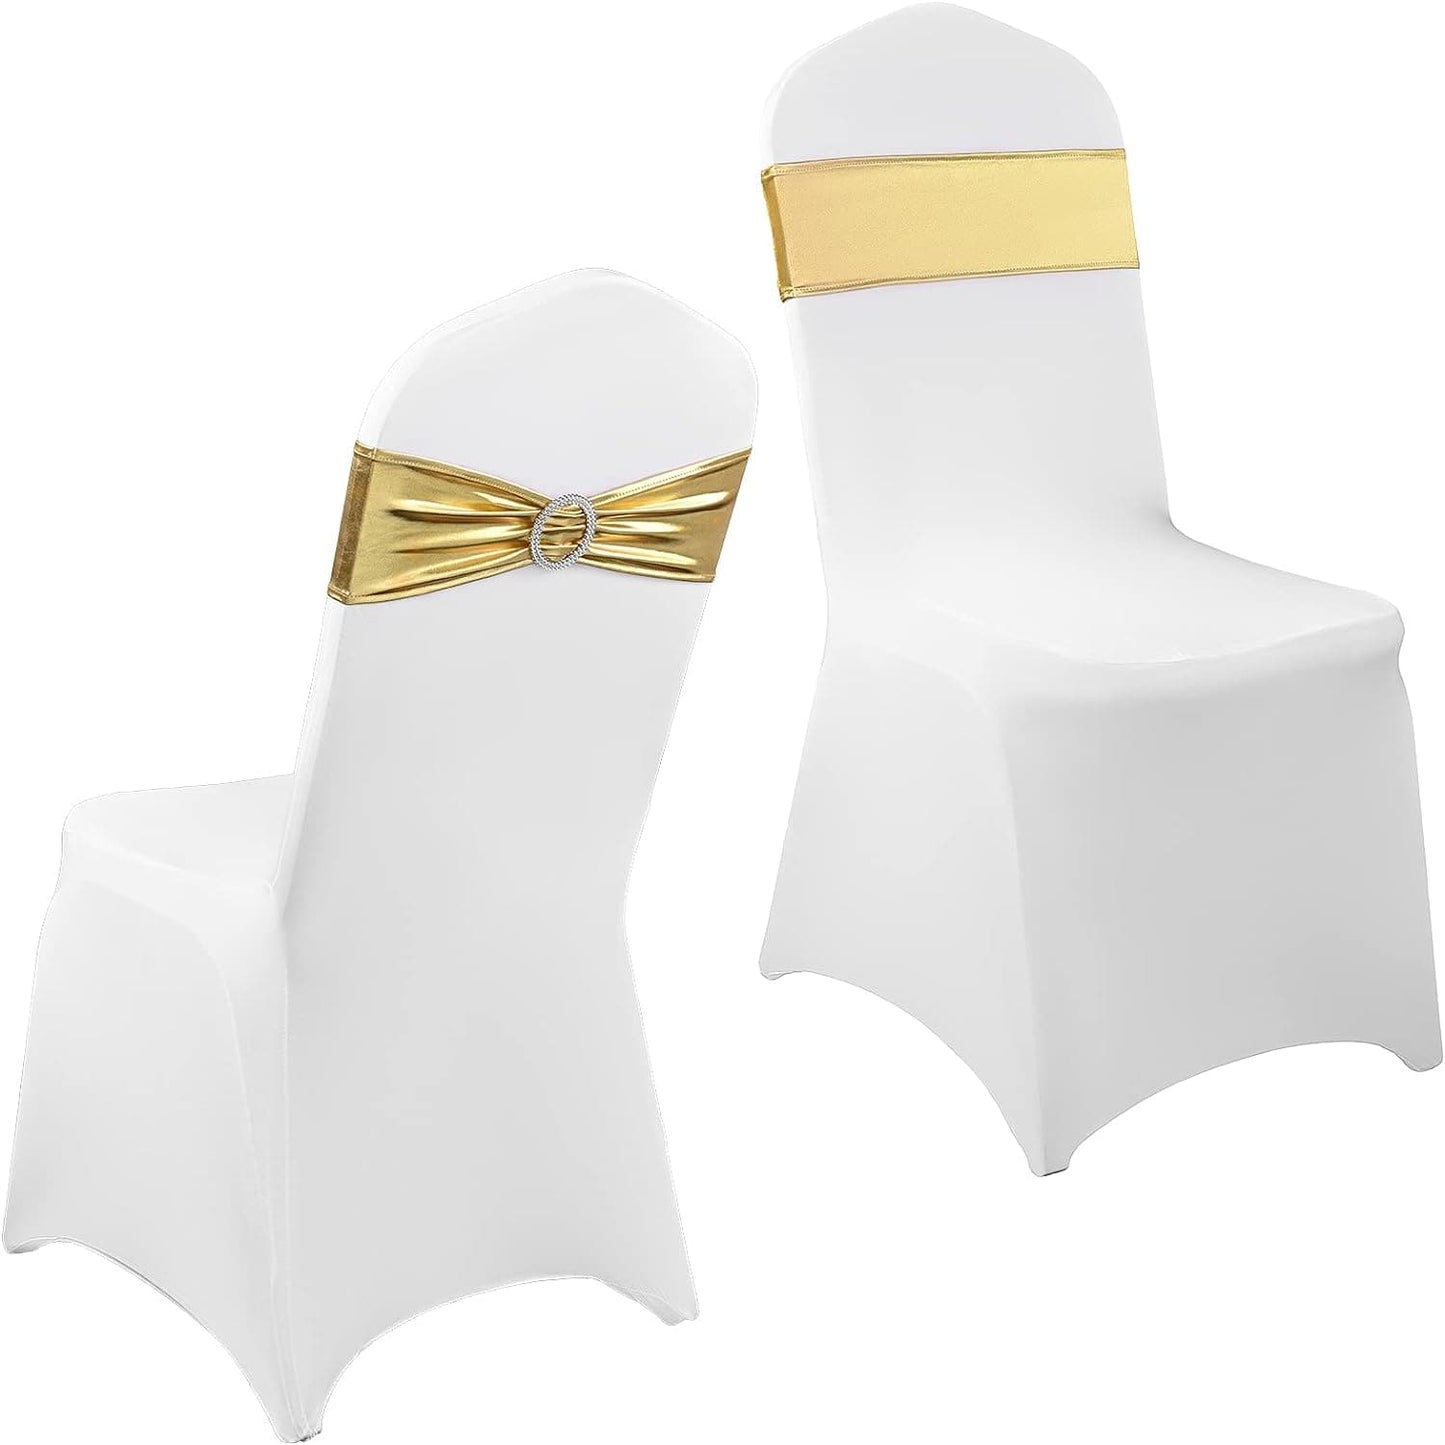 50 PCS Buckle Chair Cover Stretch Chair Band